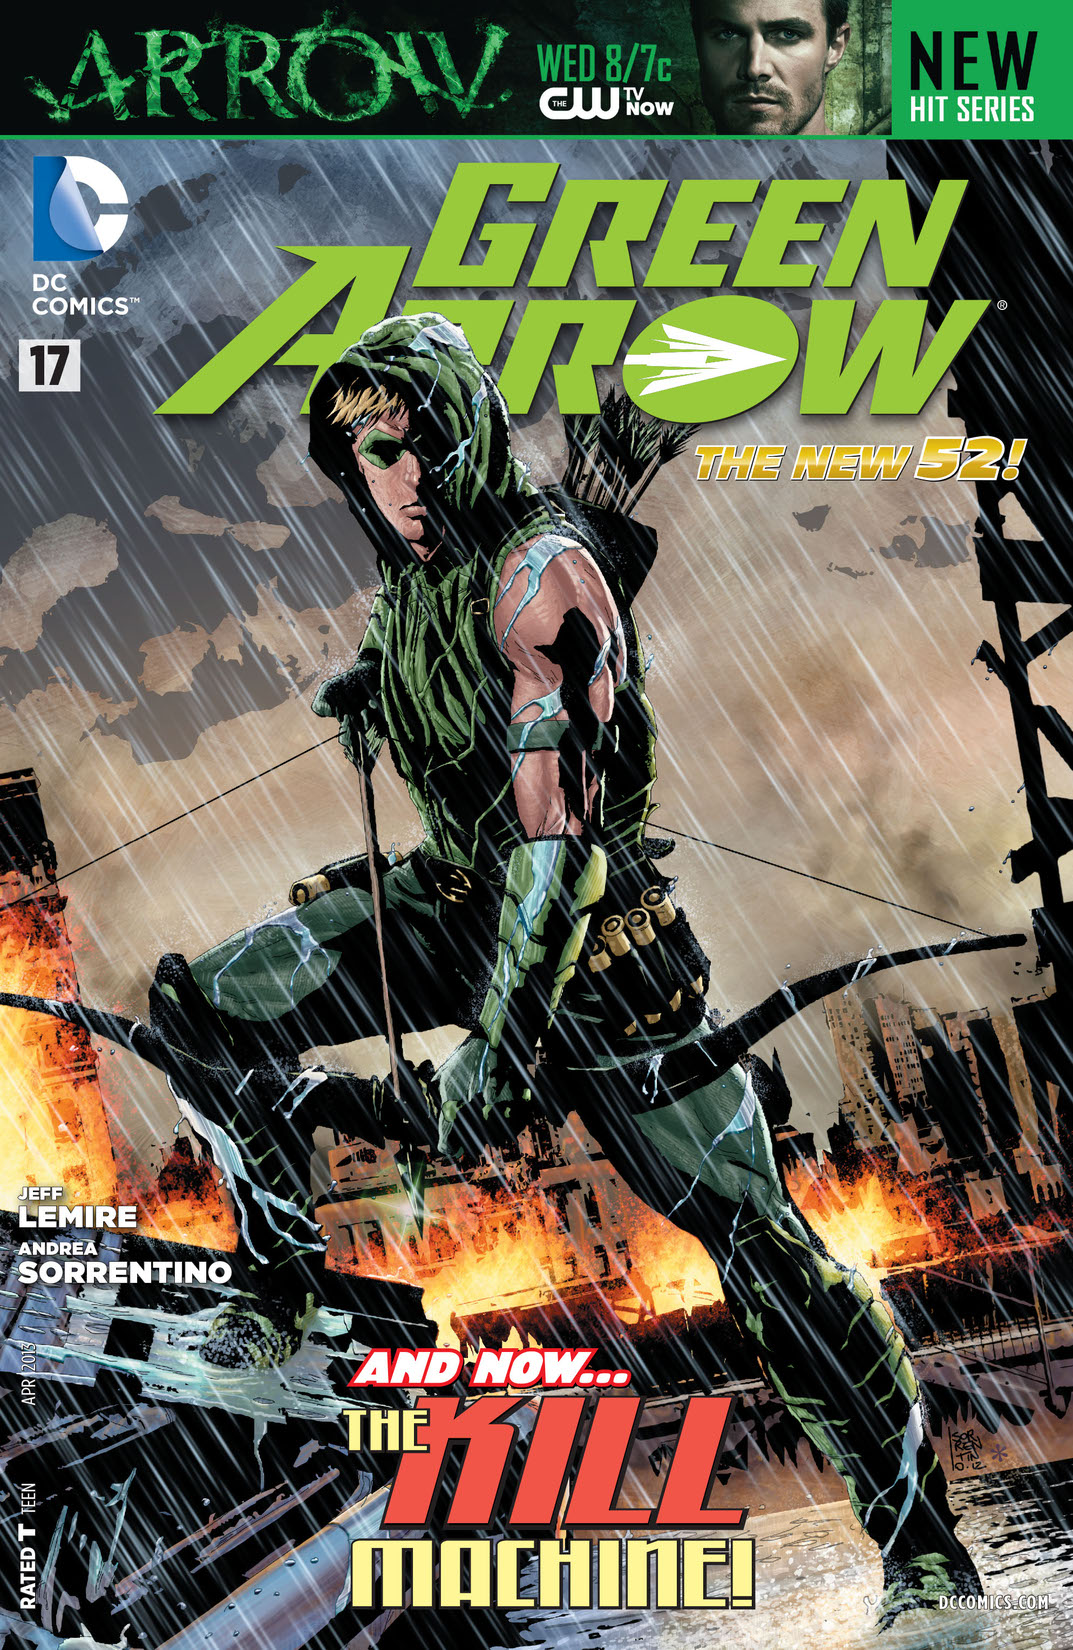 Green Arrow (2011-) #17 preview images